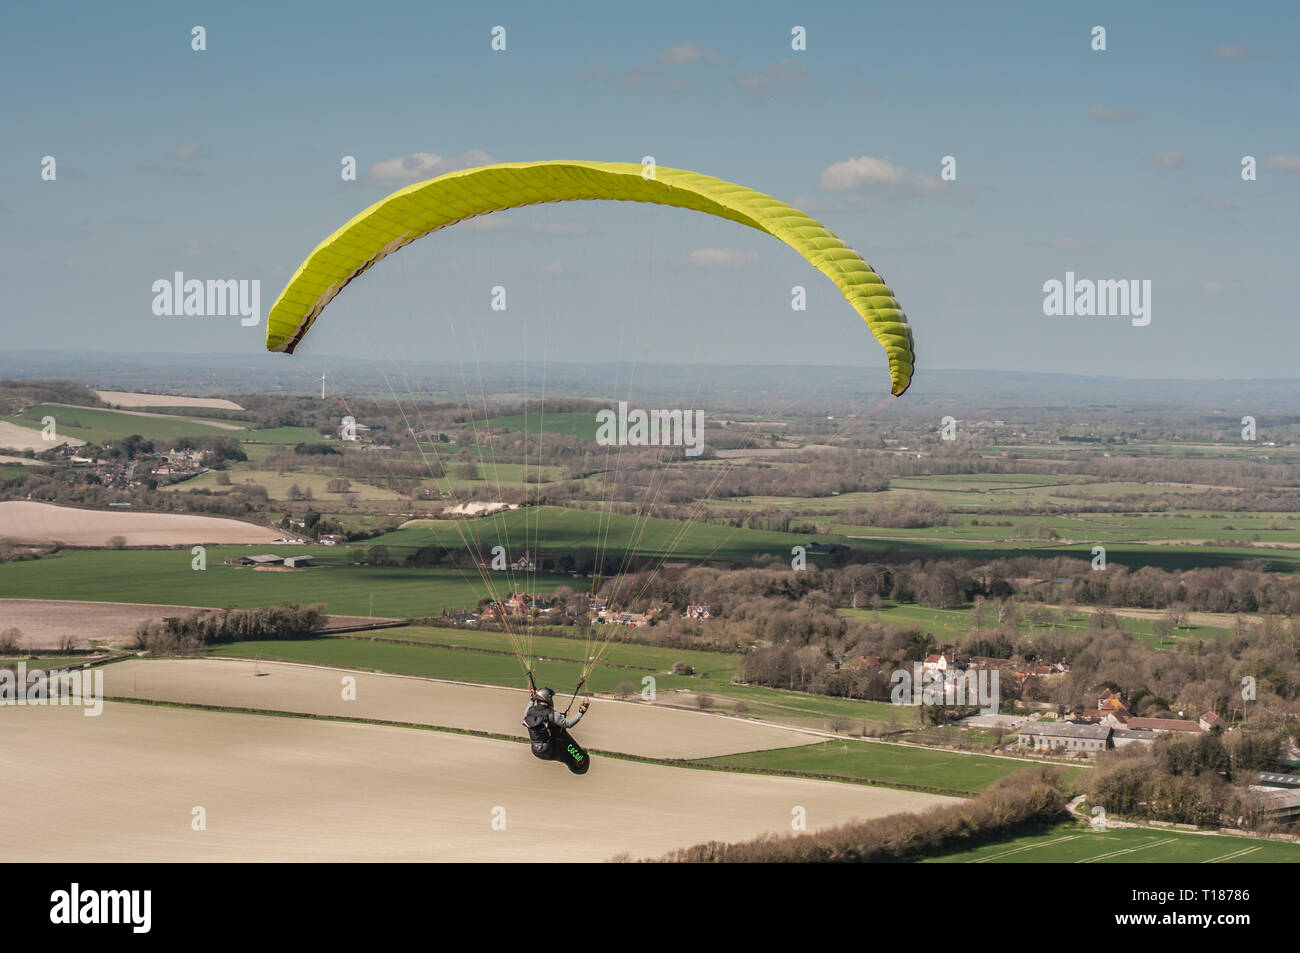 Firle, Lewes, East Sussex, UK. 24th Mar 2019. A glorious afternoon in the South Downs. Paraglider over the countryside. Stock Photo